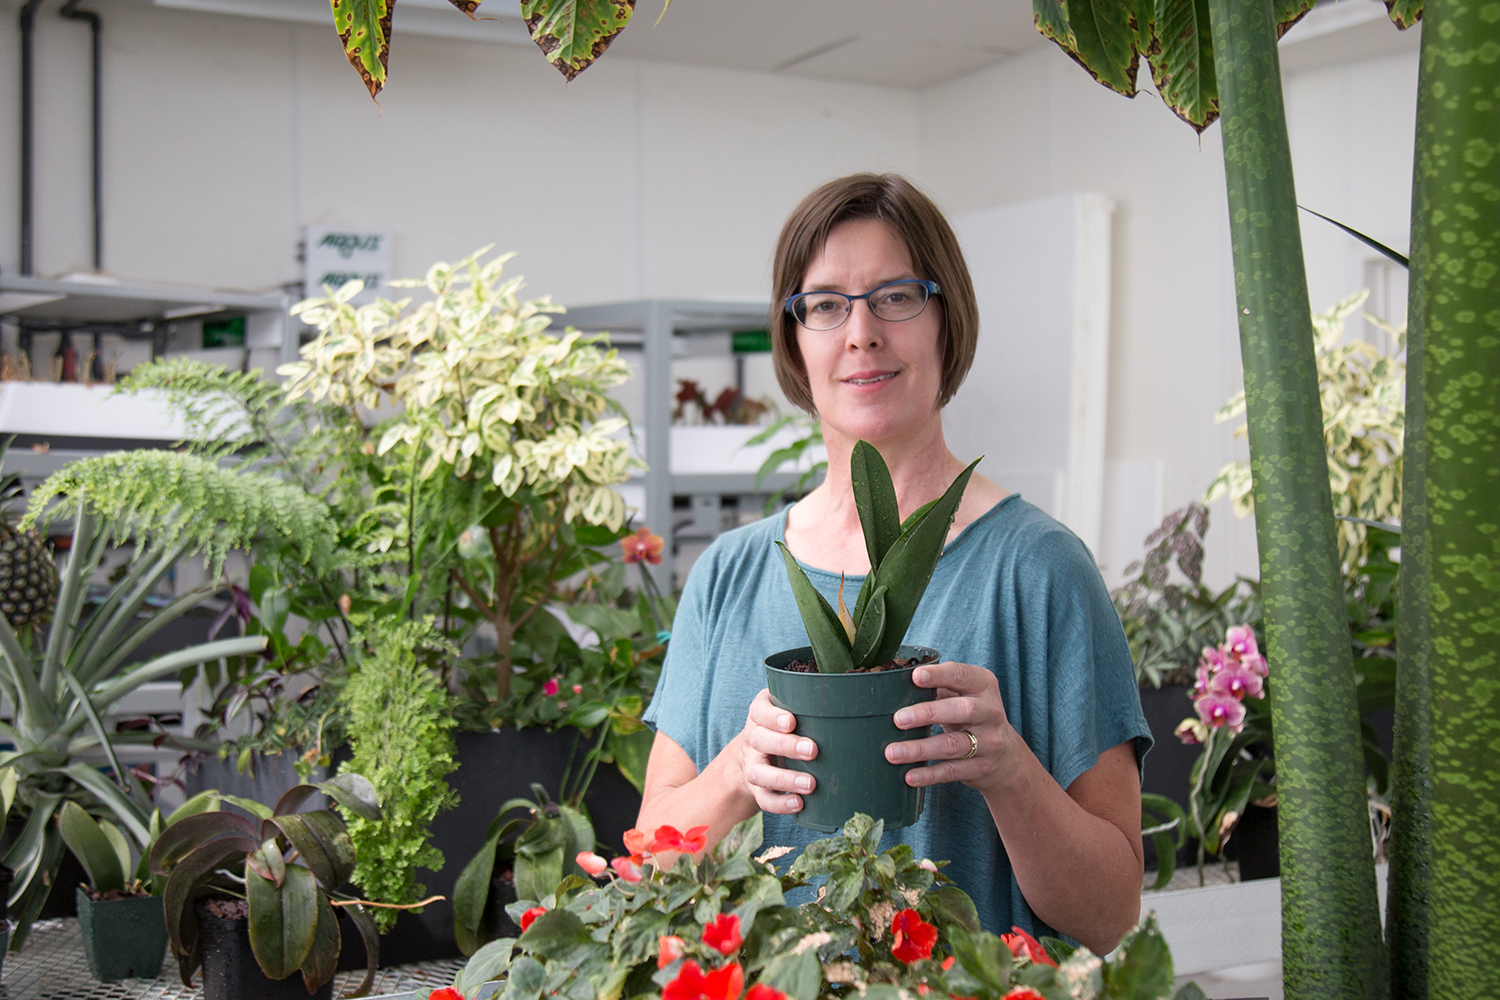 Stacey Harmer stands in a UC Davis greenhouse